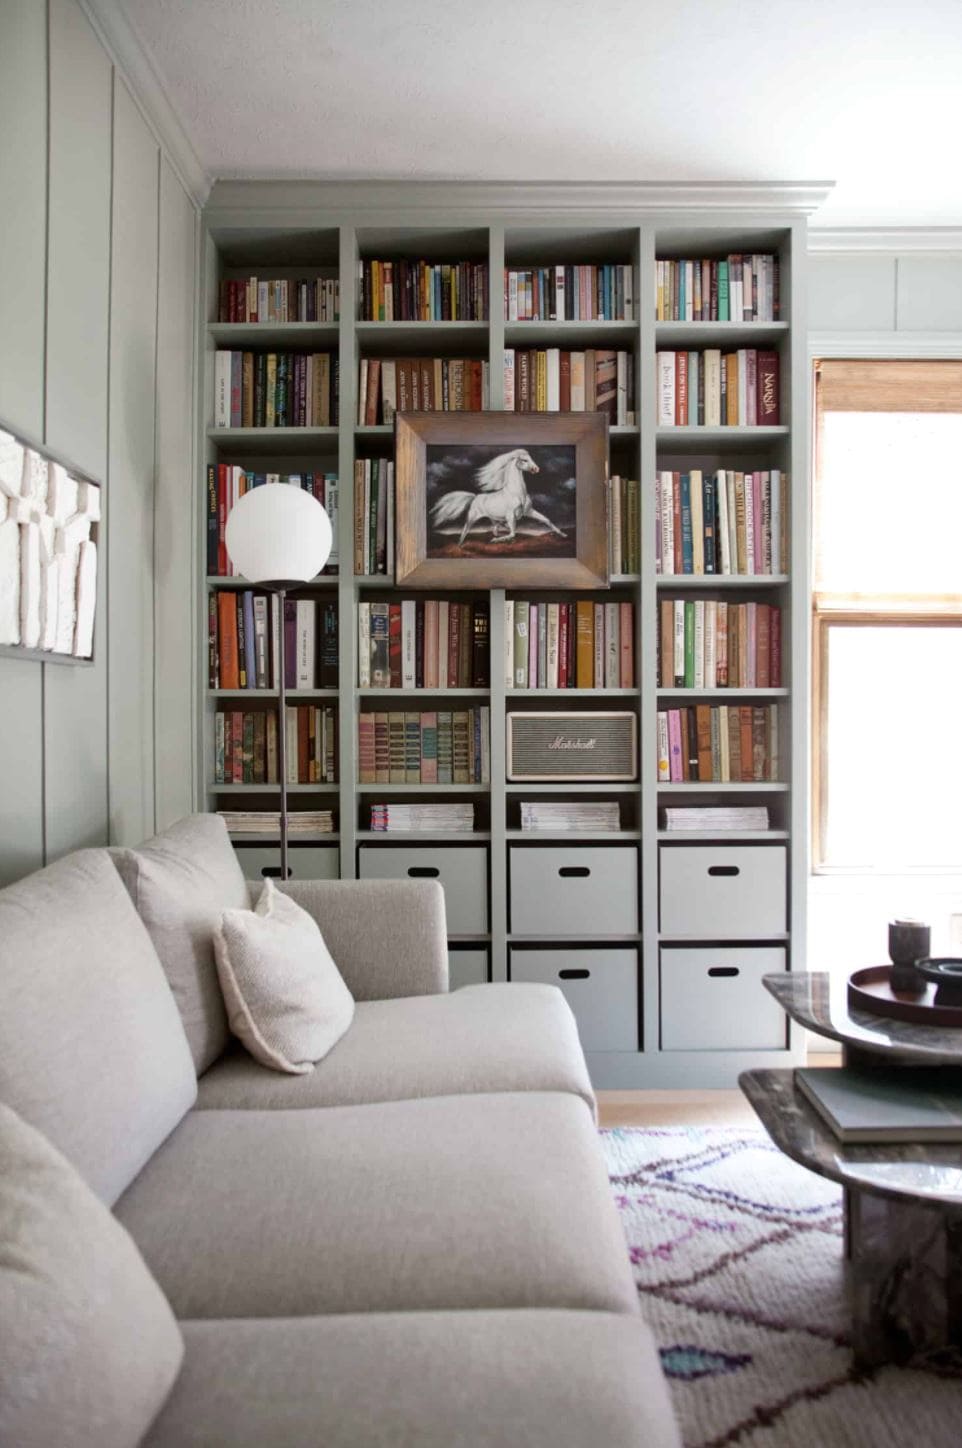 Built-in shelves painted a gray-green and filled with books and art.